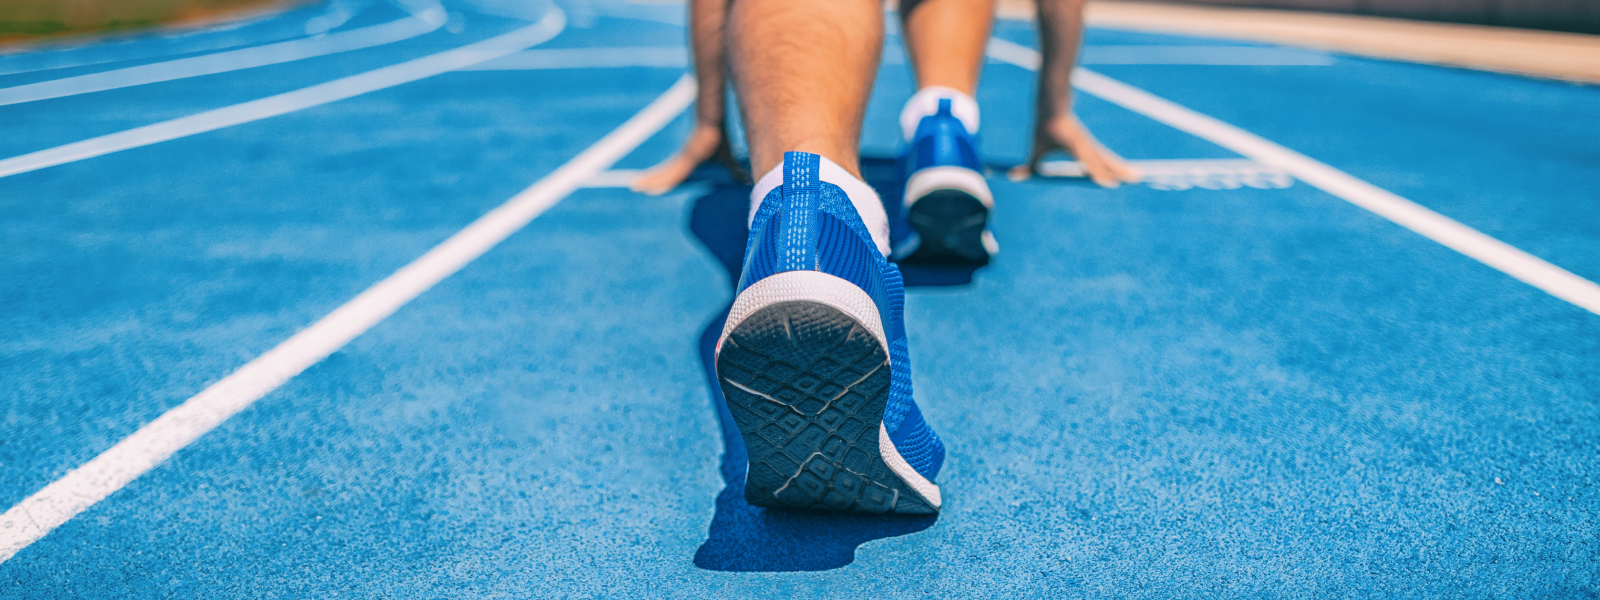 Athlete’s Foot; Problems, Treatment, and Prevention